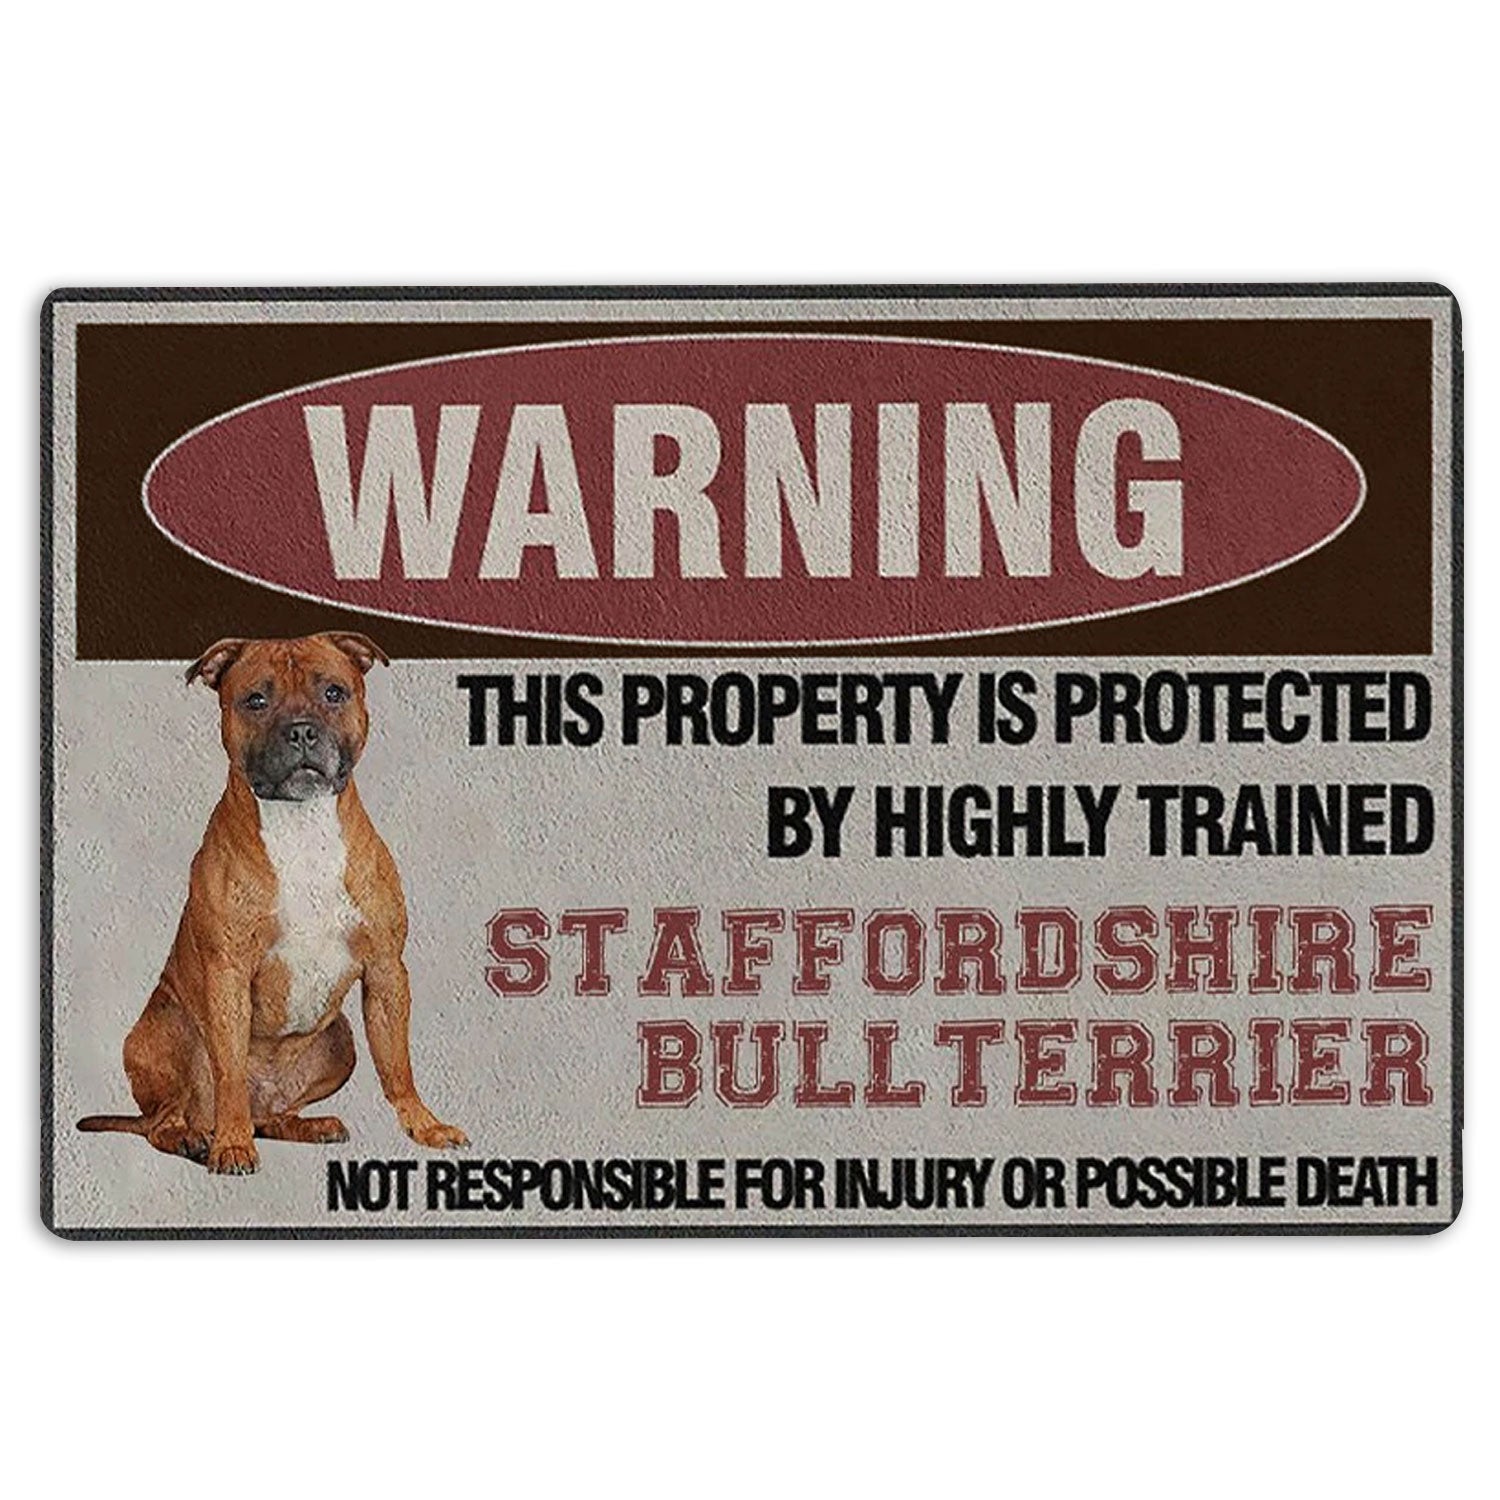 Ohaprints-Doormat-Outdoor-Indoor-This-Property-Is-Protected-By-A-Highly-Trained-Staffordshire-Rubber-Door-Mat-1369-18'' x 30''